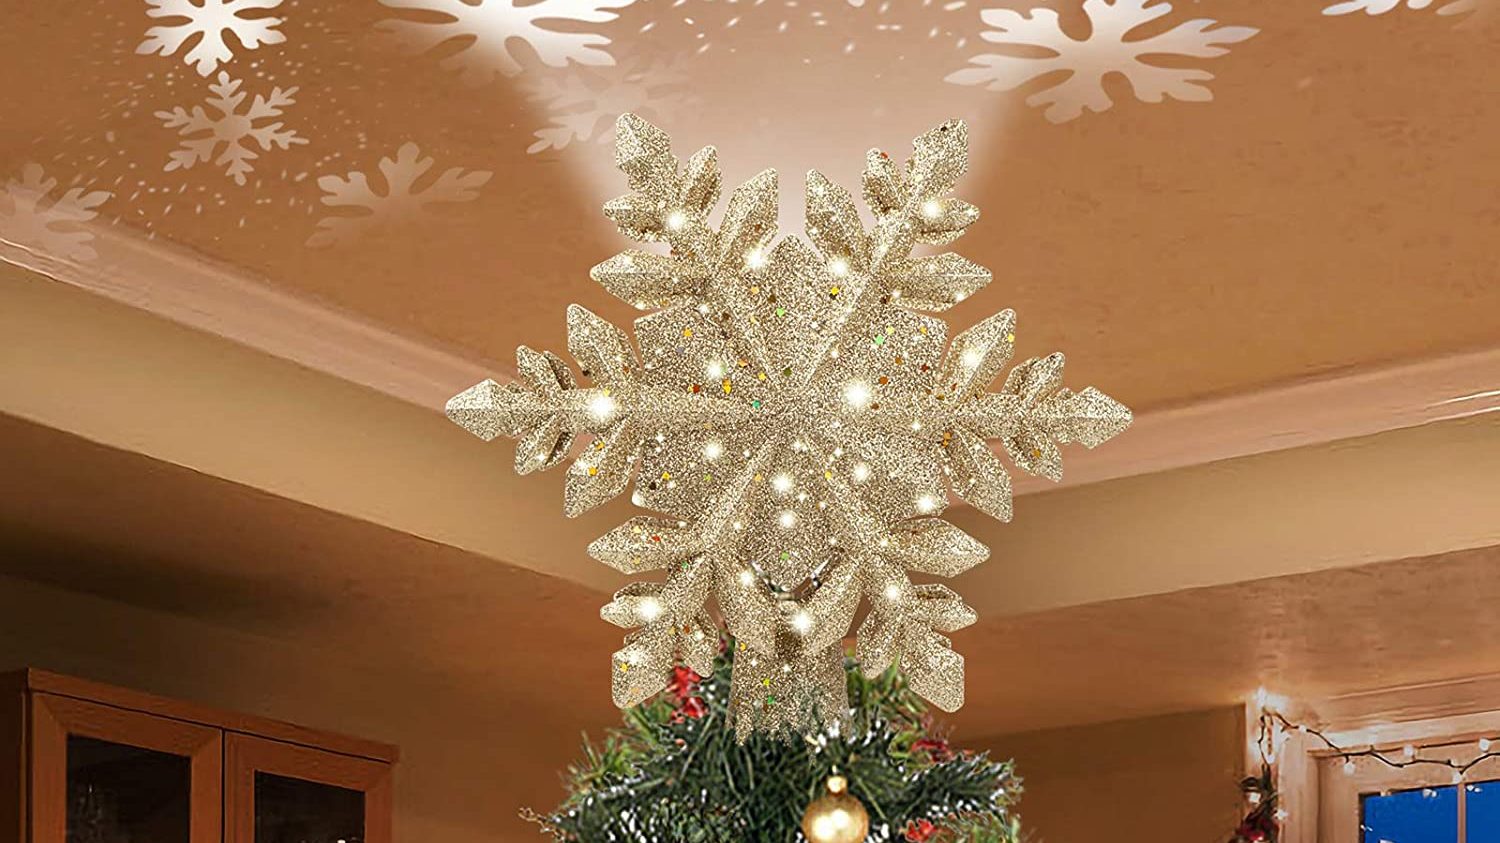 8 Inches Christmas Tree Topper Gold Glittered Christmas Tree Decoration .for Party Home Decoration Glitter Snowflake Ornament 2 Pack Christmas Gold Tree Stars 